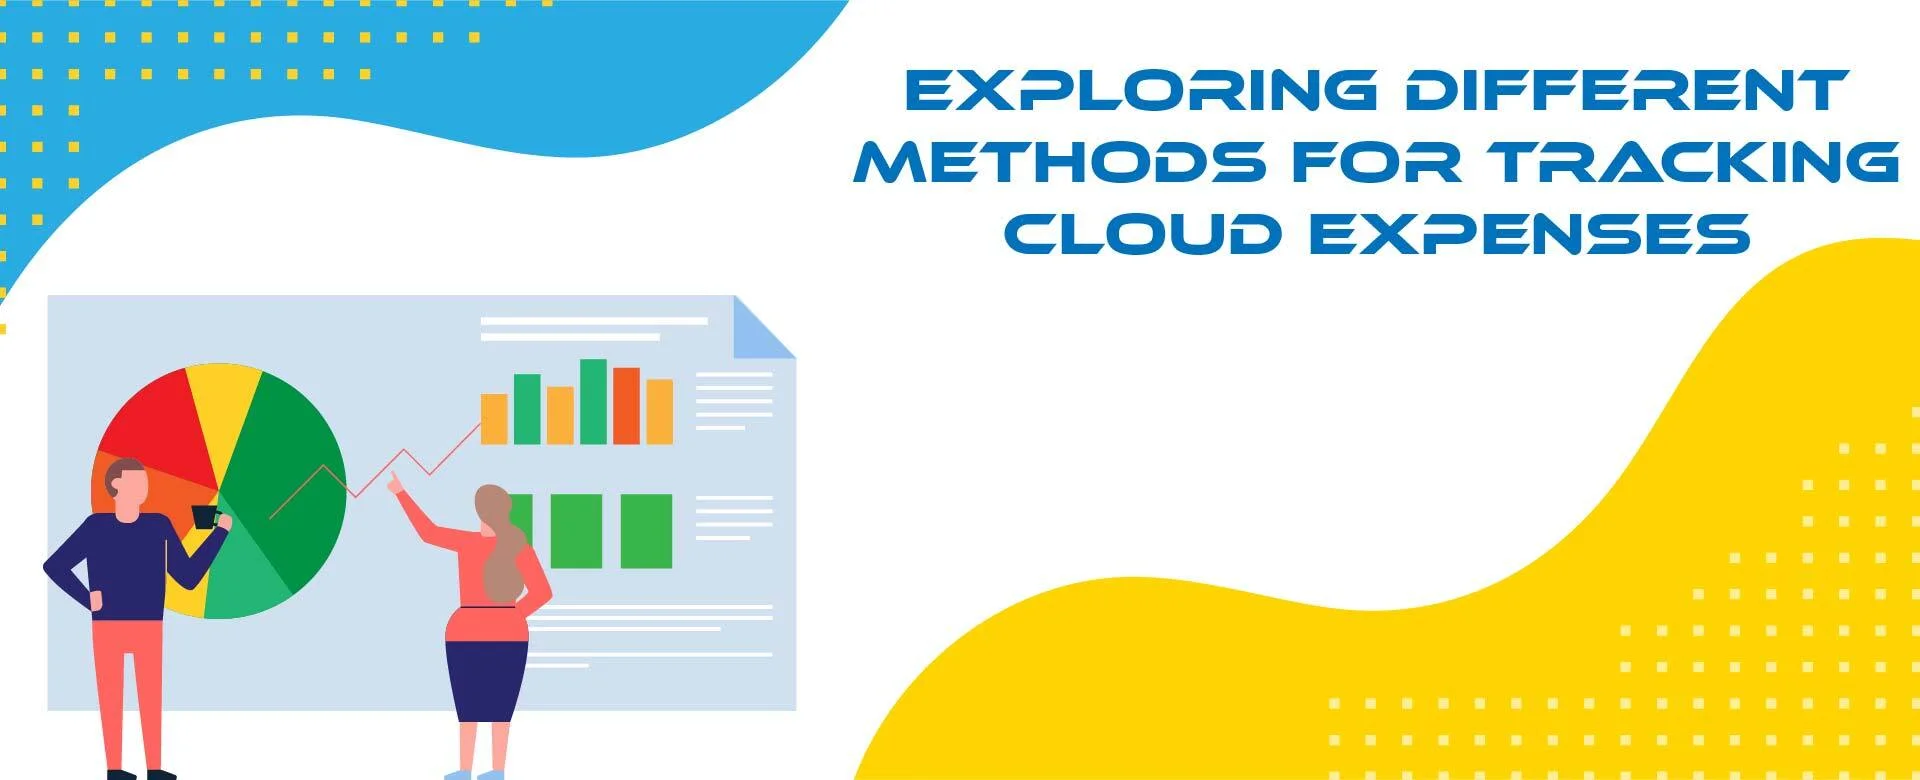 Exploring Different Methods for Tracking Cloud Expenses